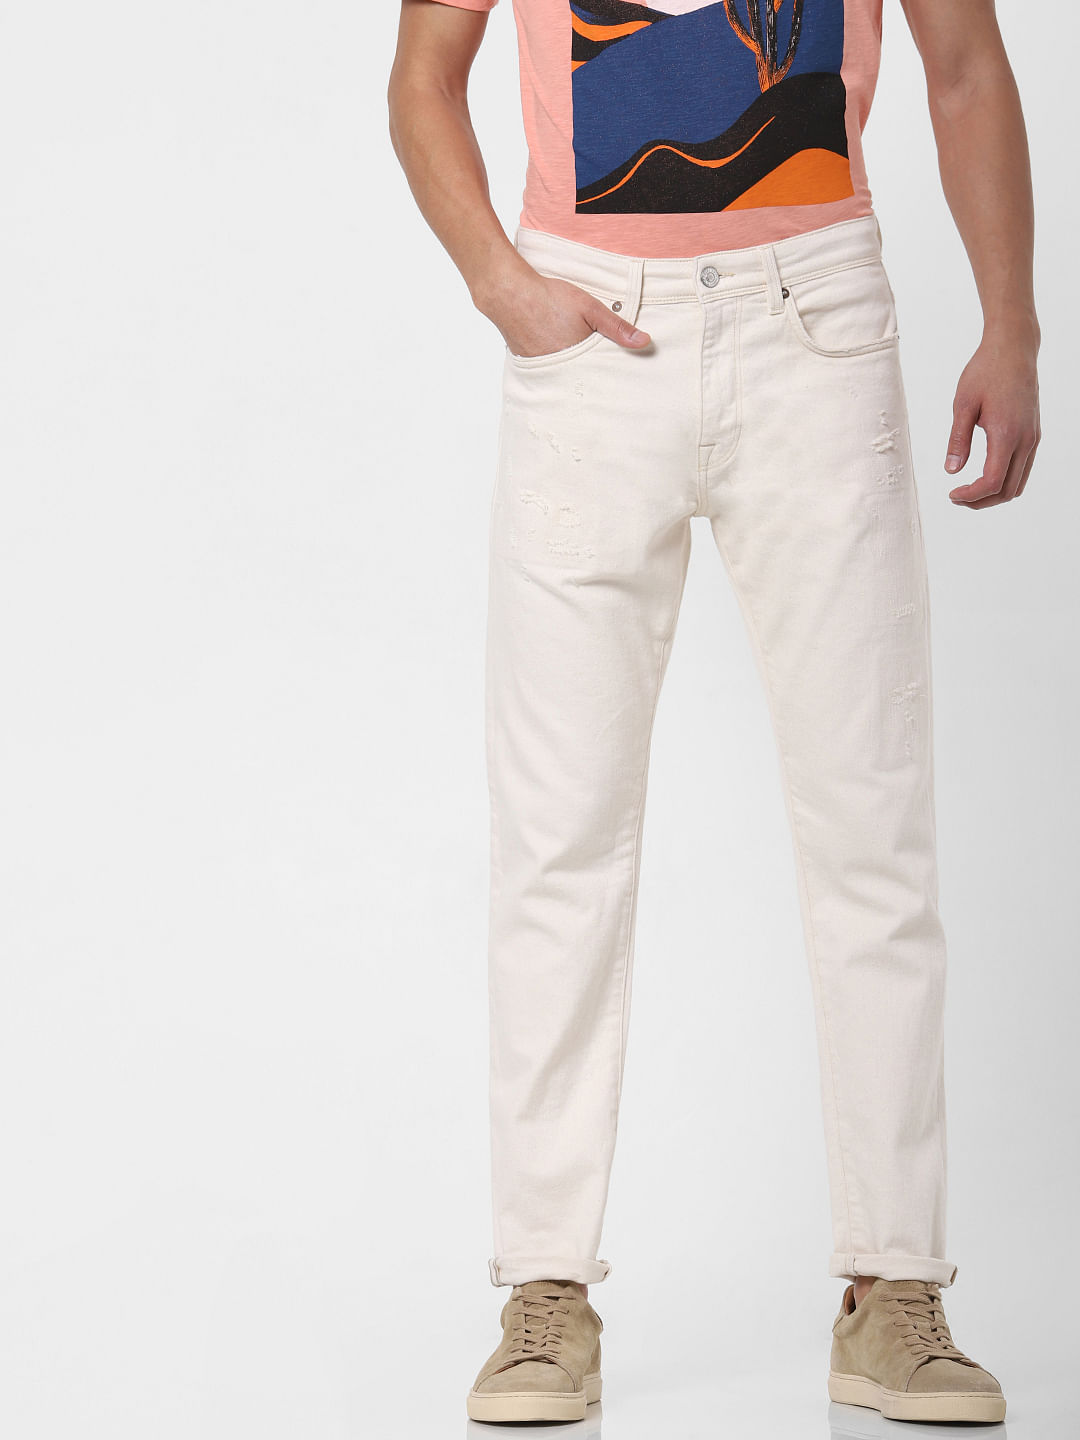 faded white jeans